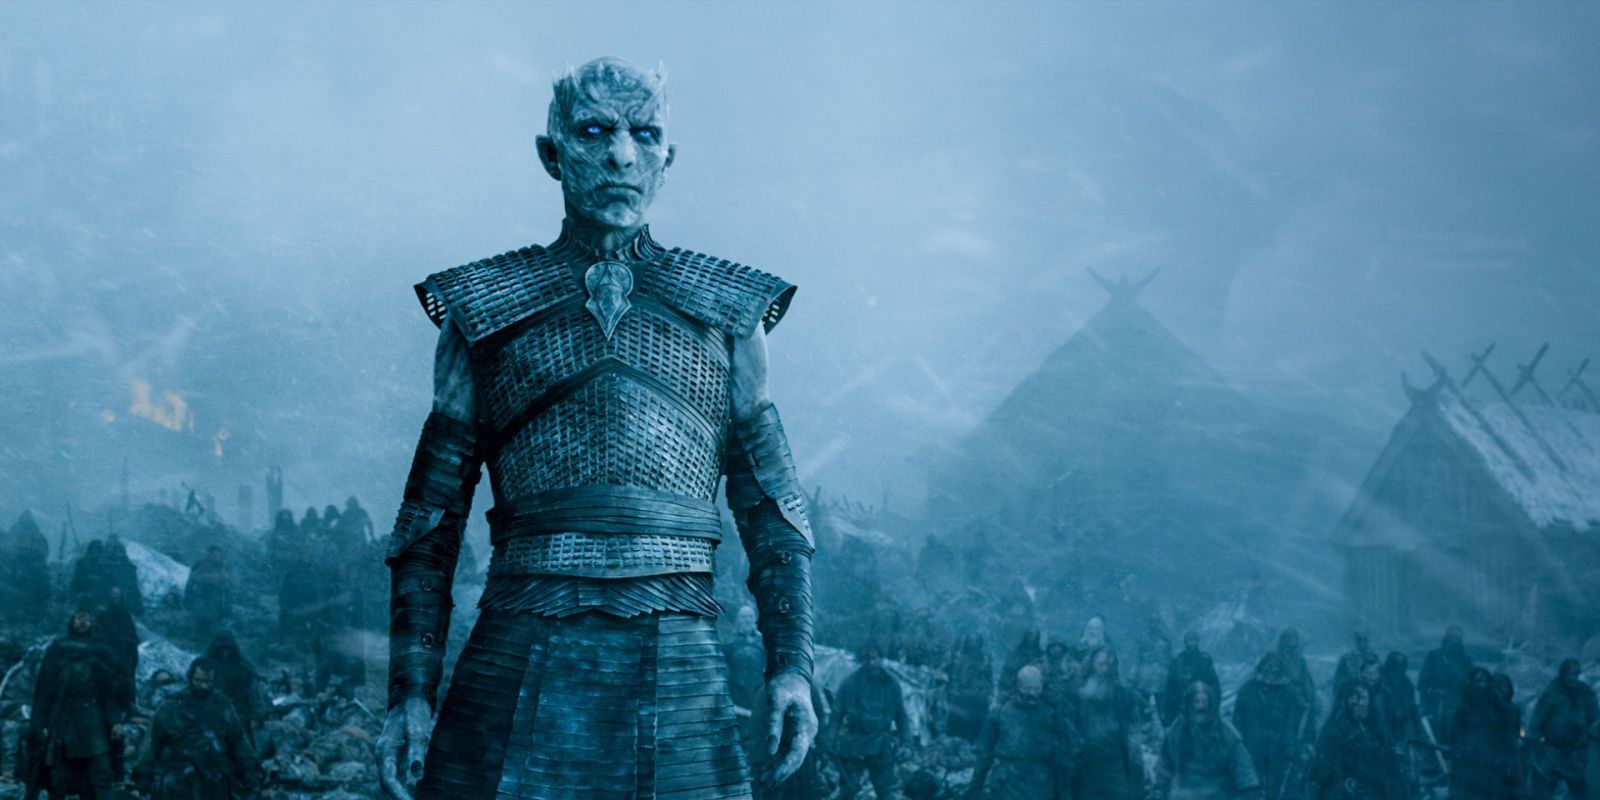 The Night King stand in front of his army in Game of Thrones